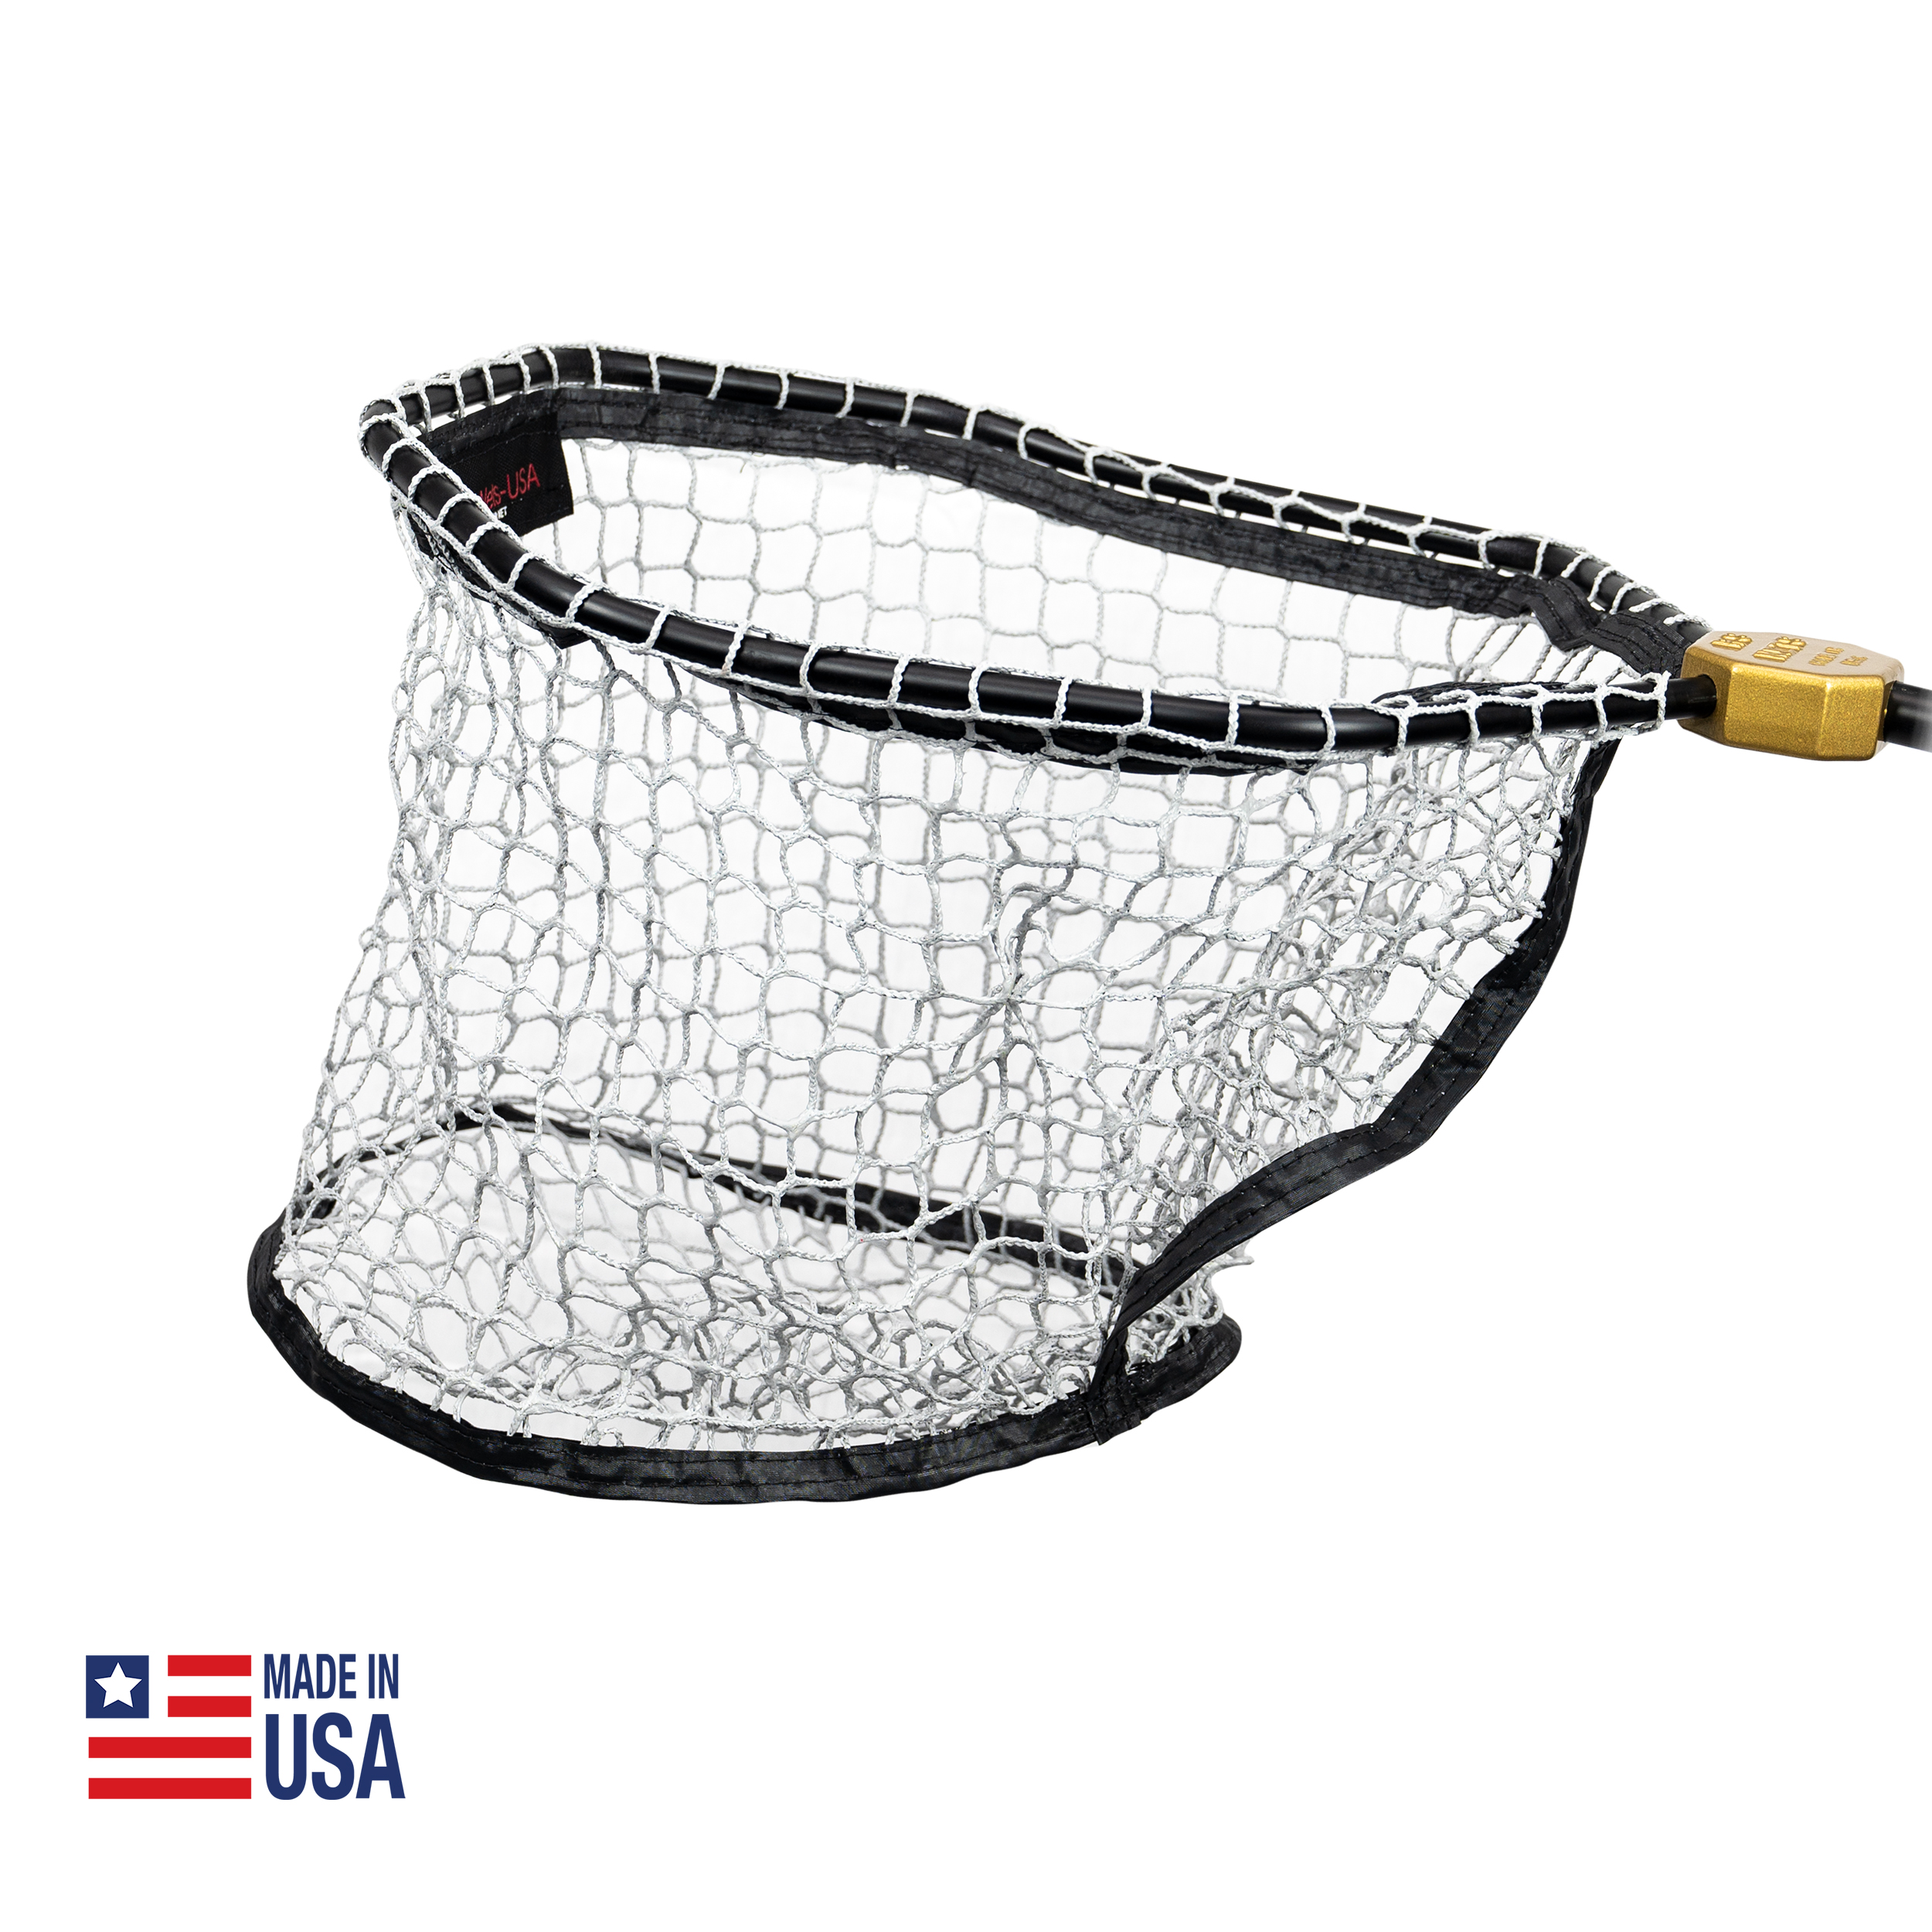 OUR NETS  RS NETS USA